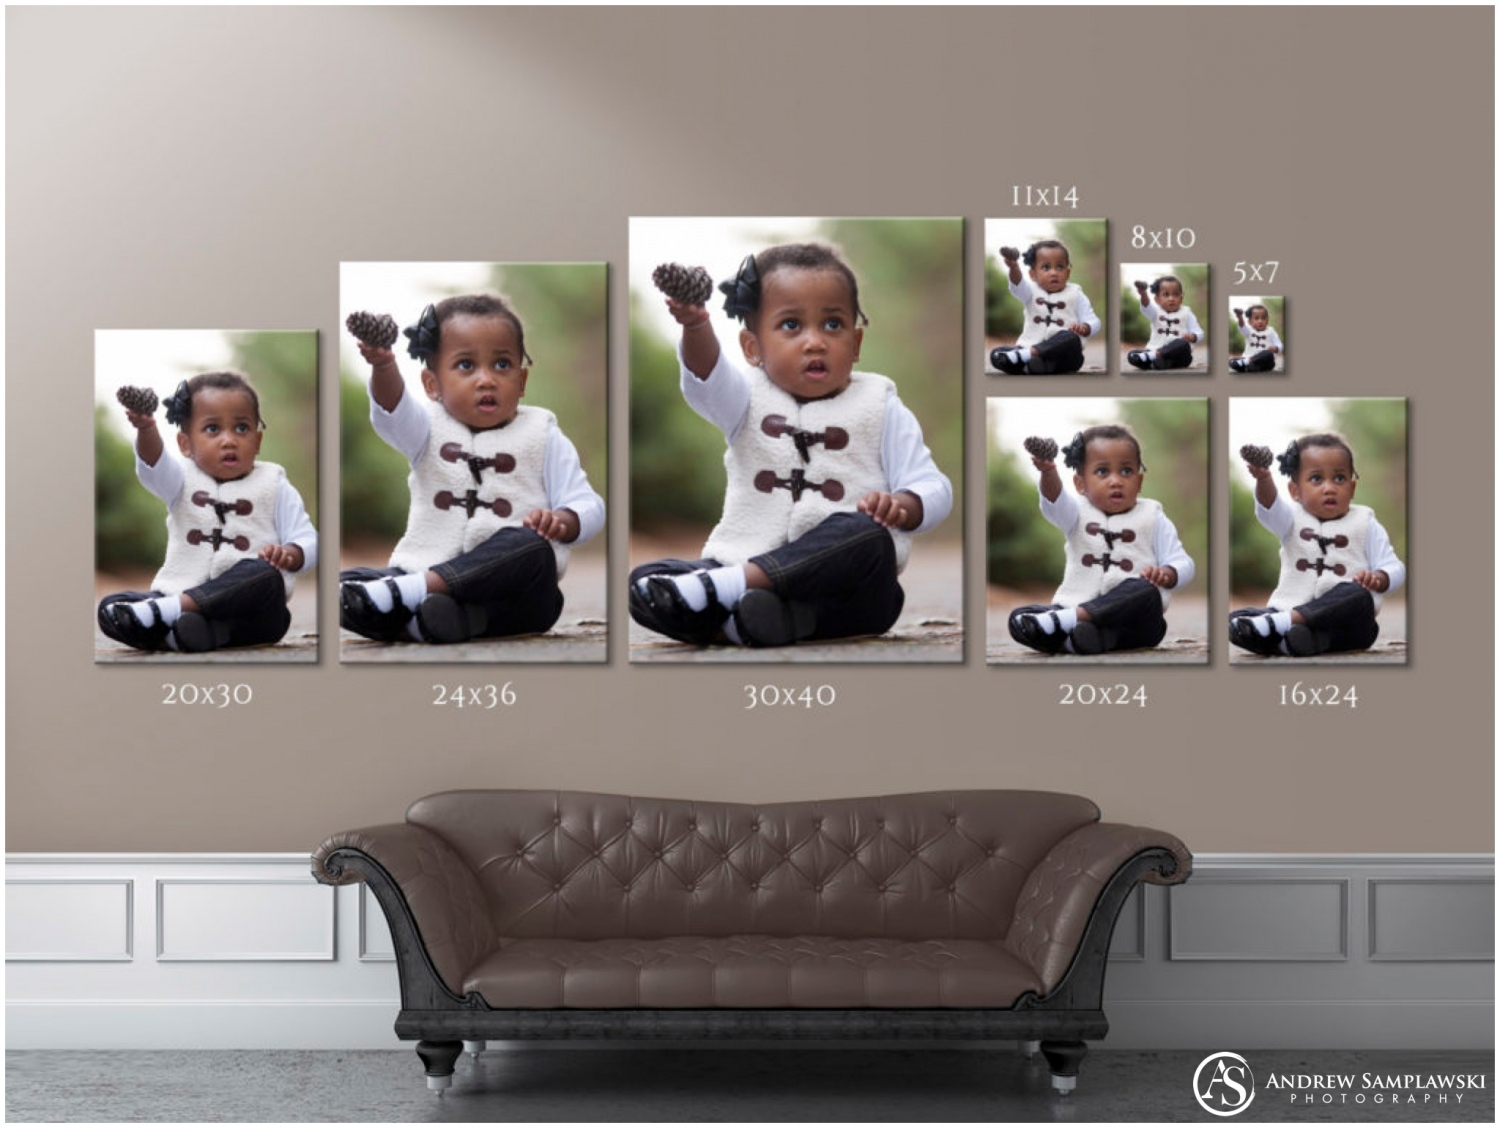 metadata: Wedding and family photographer, Andrew Samplawski, shares tips on the appropriate sizes for wall art and collages when using portraits in home décor.